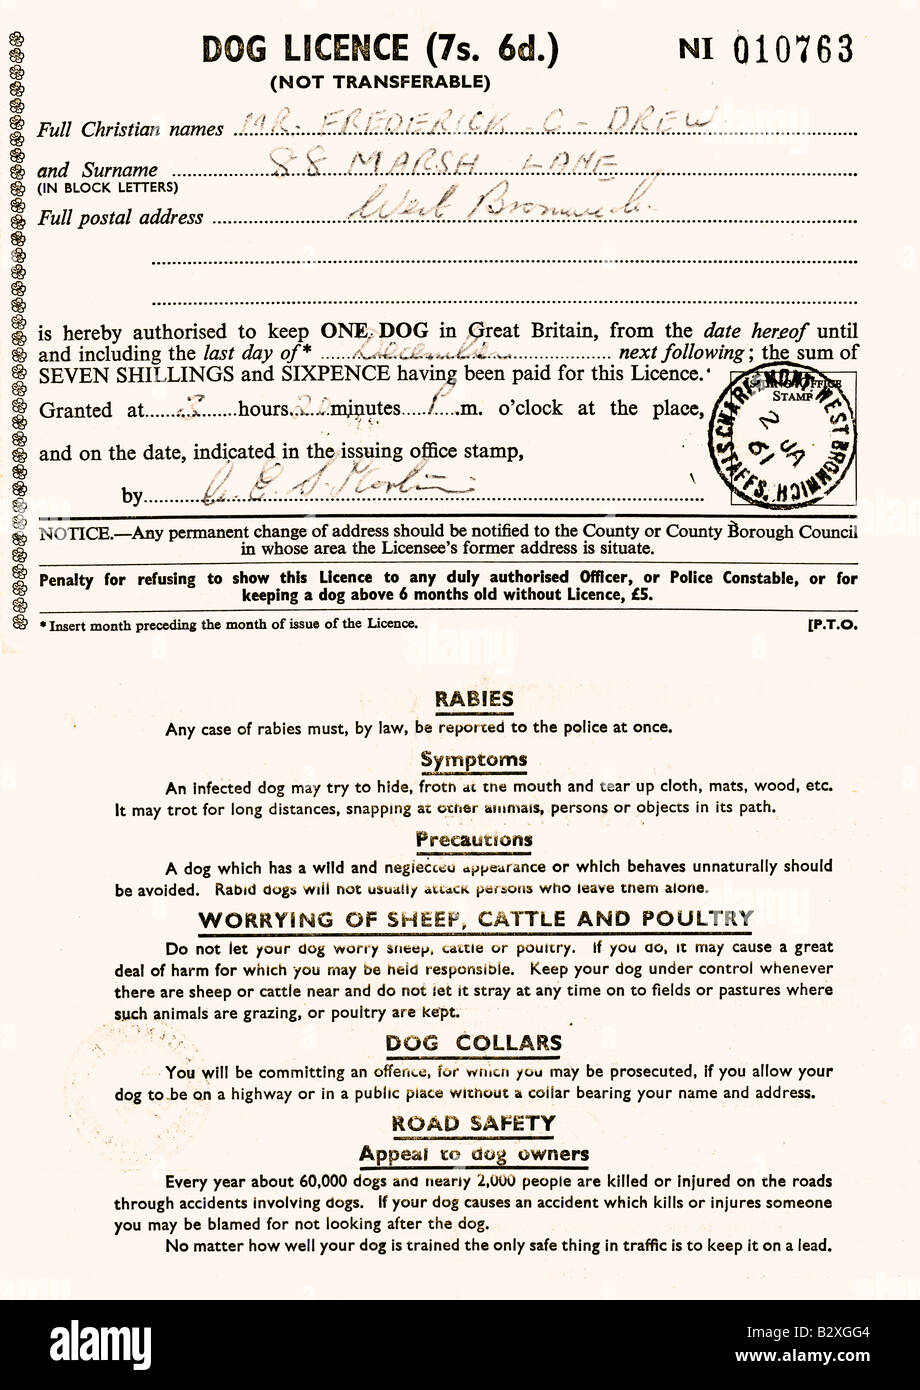 1961 UK Great Britain British Dog Licence Front and Rear Composite with conditions on the back FOR EDITORIAL USE ONLY Stock Photo